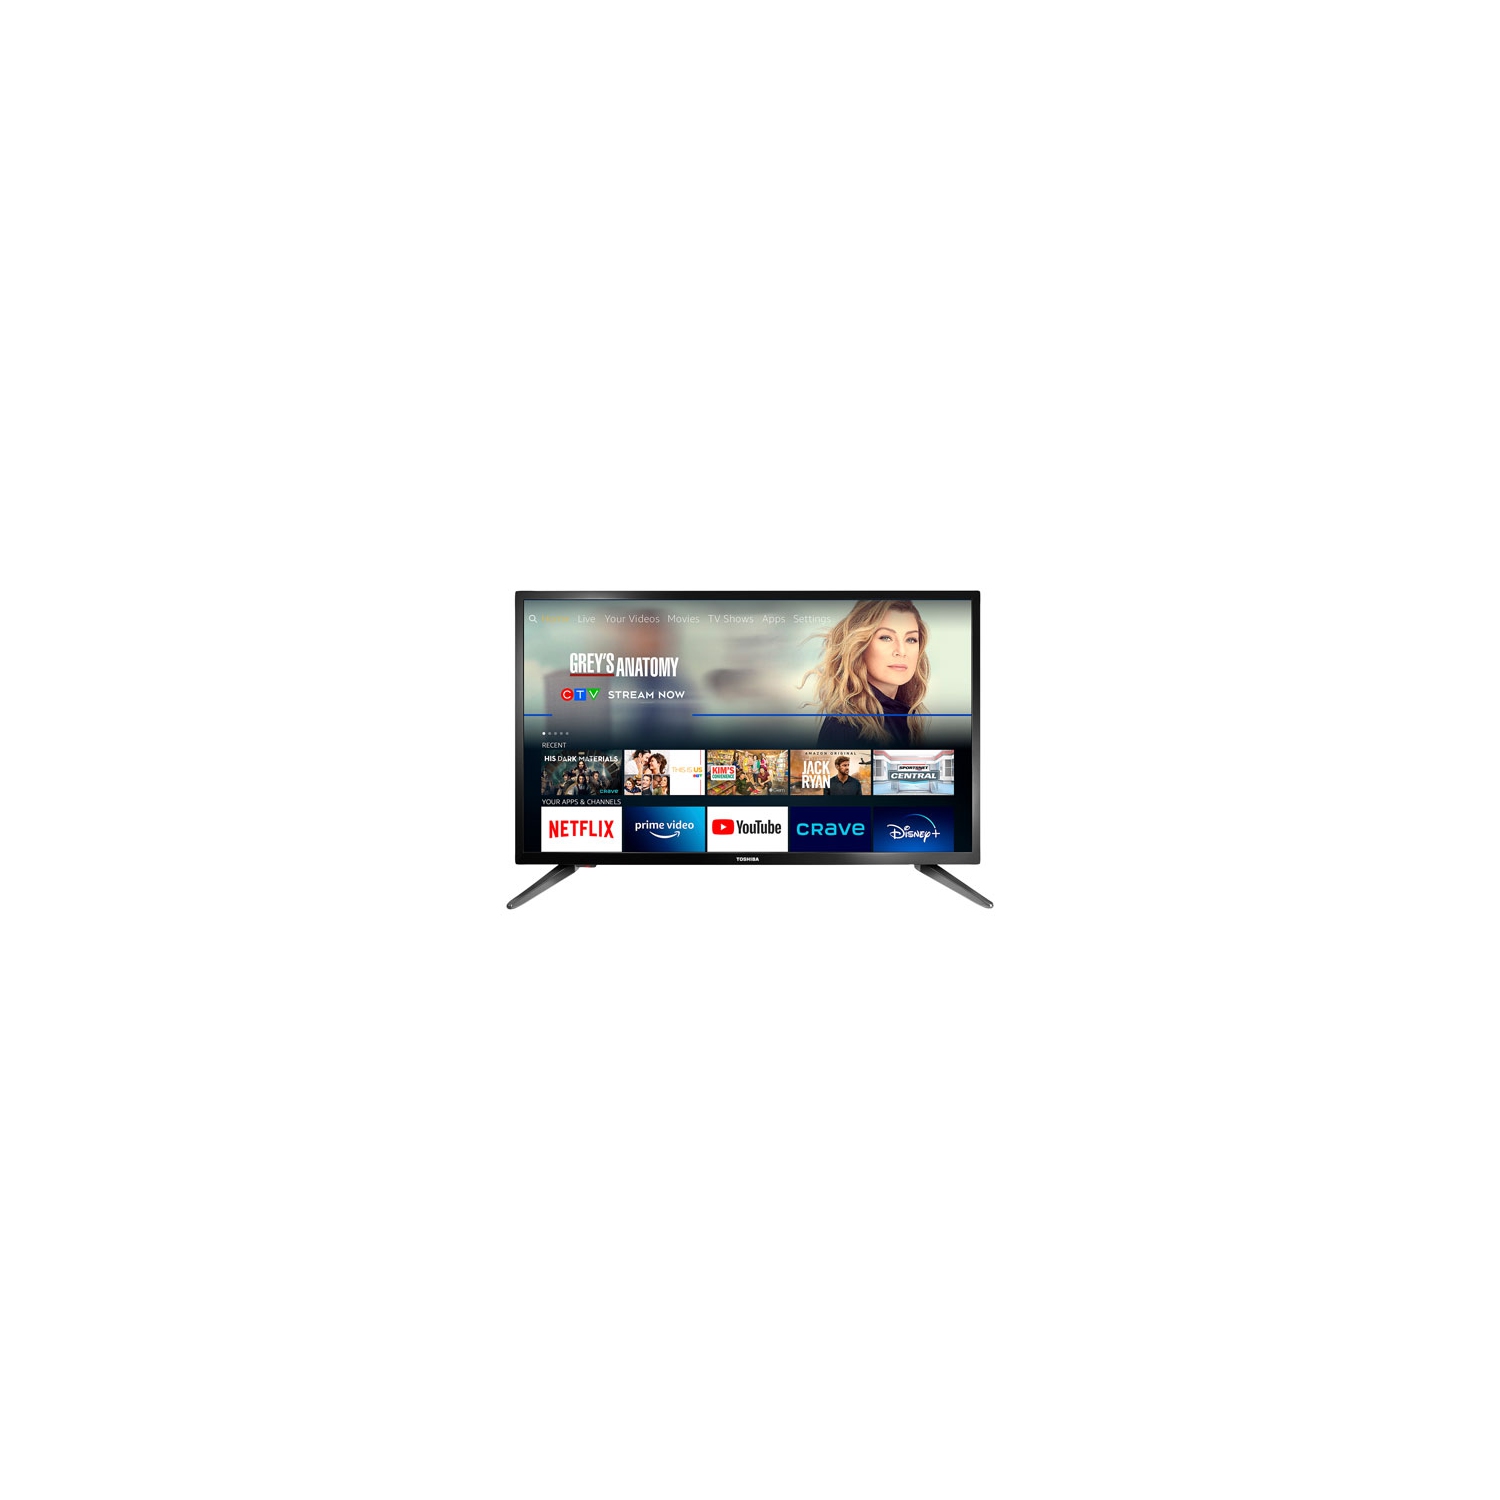 Refurbished (Excellent) - Toshiba 32" 720p HD LED Smart TV (32LF221C21) - Fire TV Edition